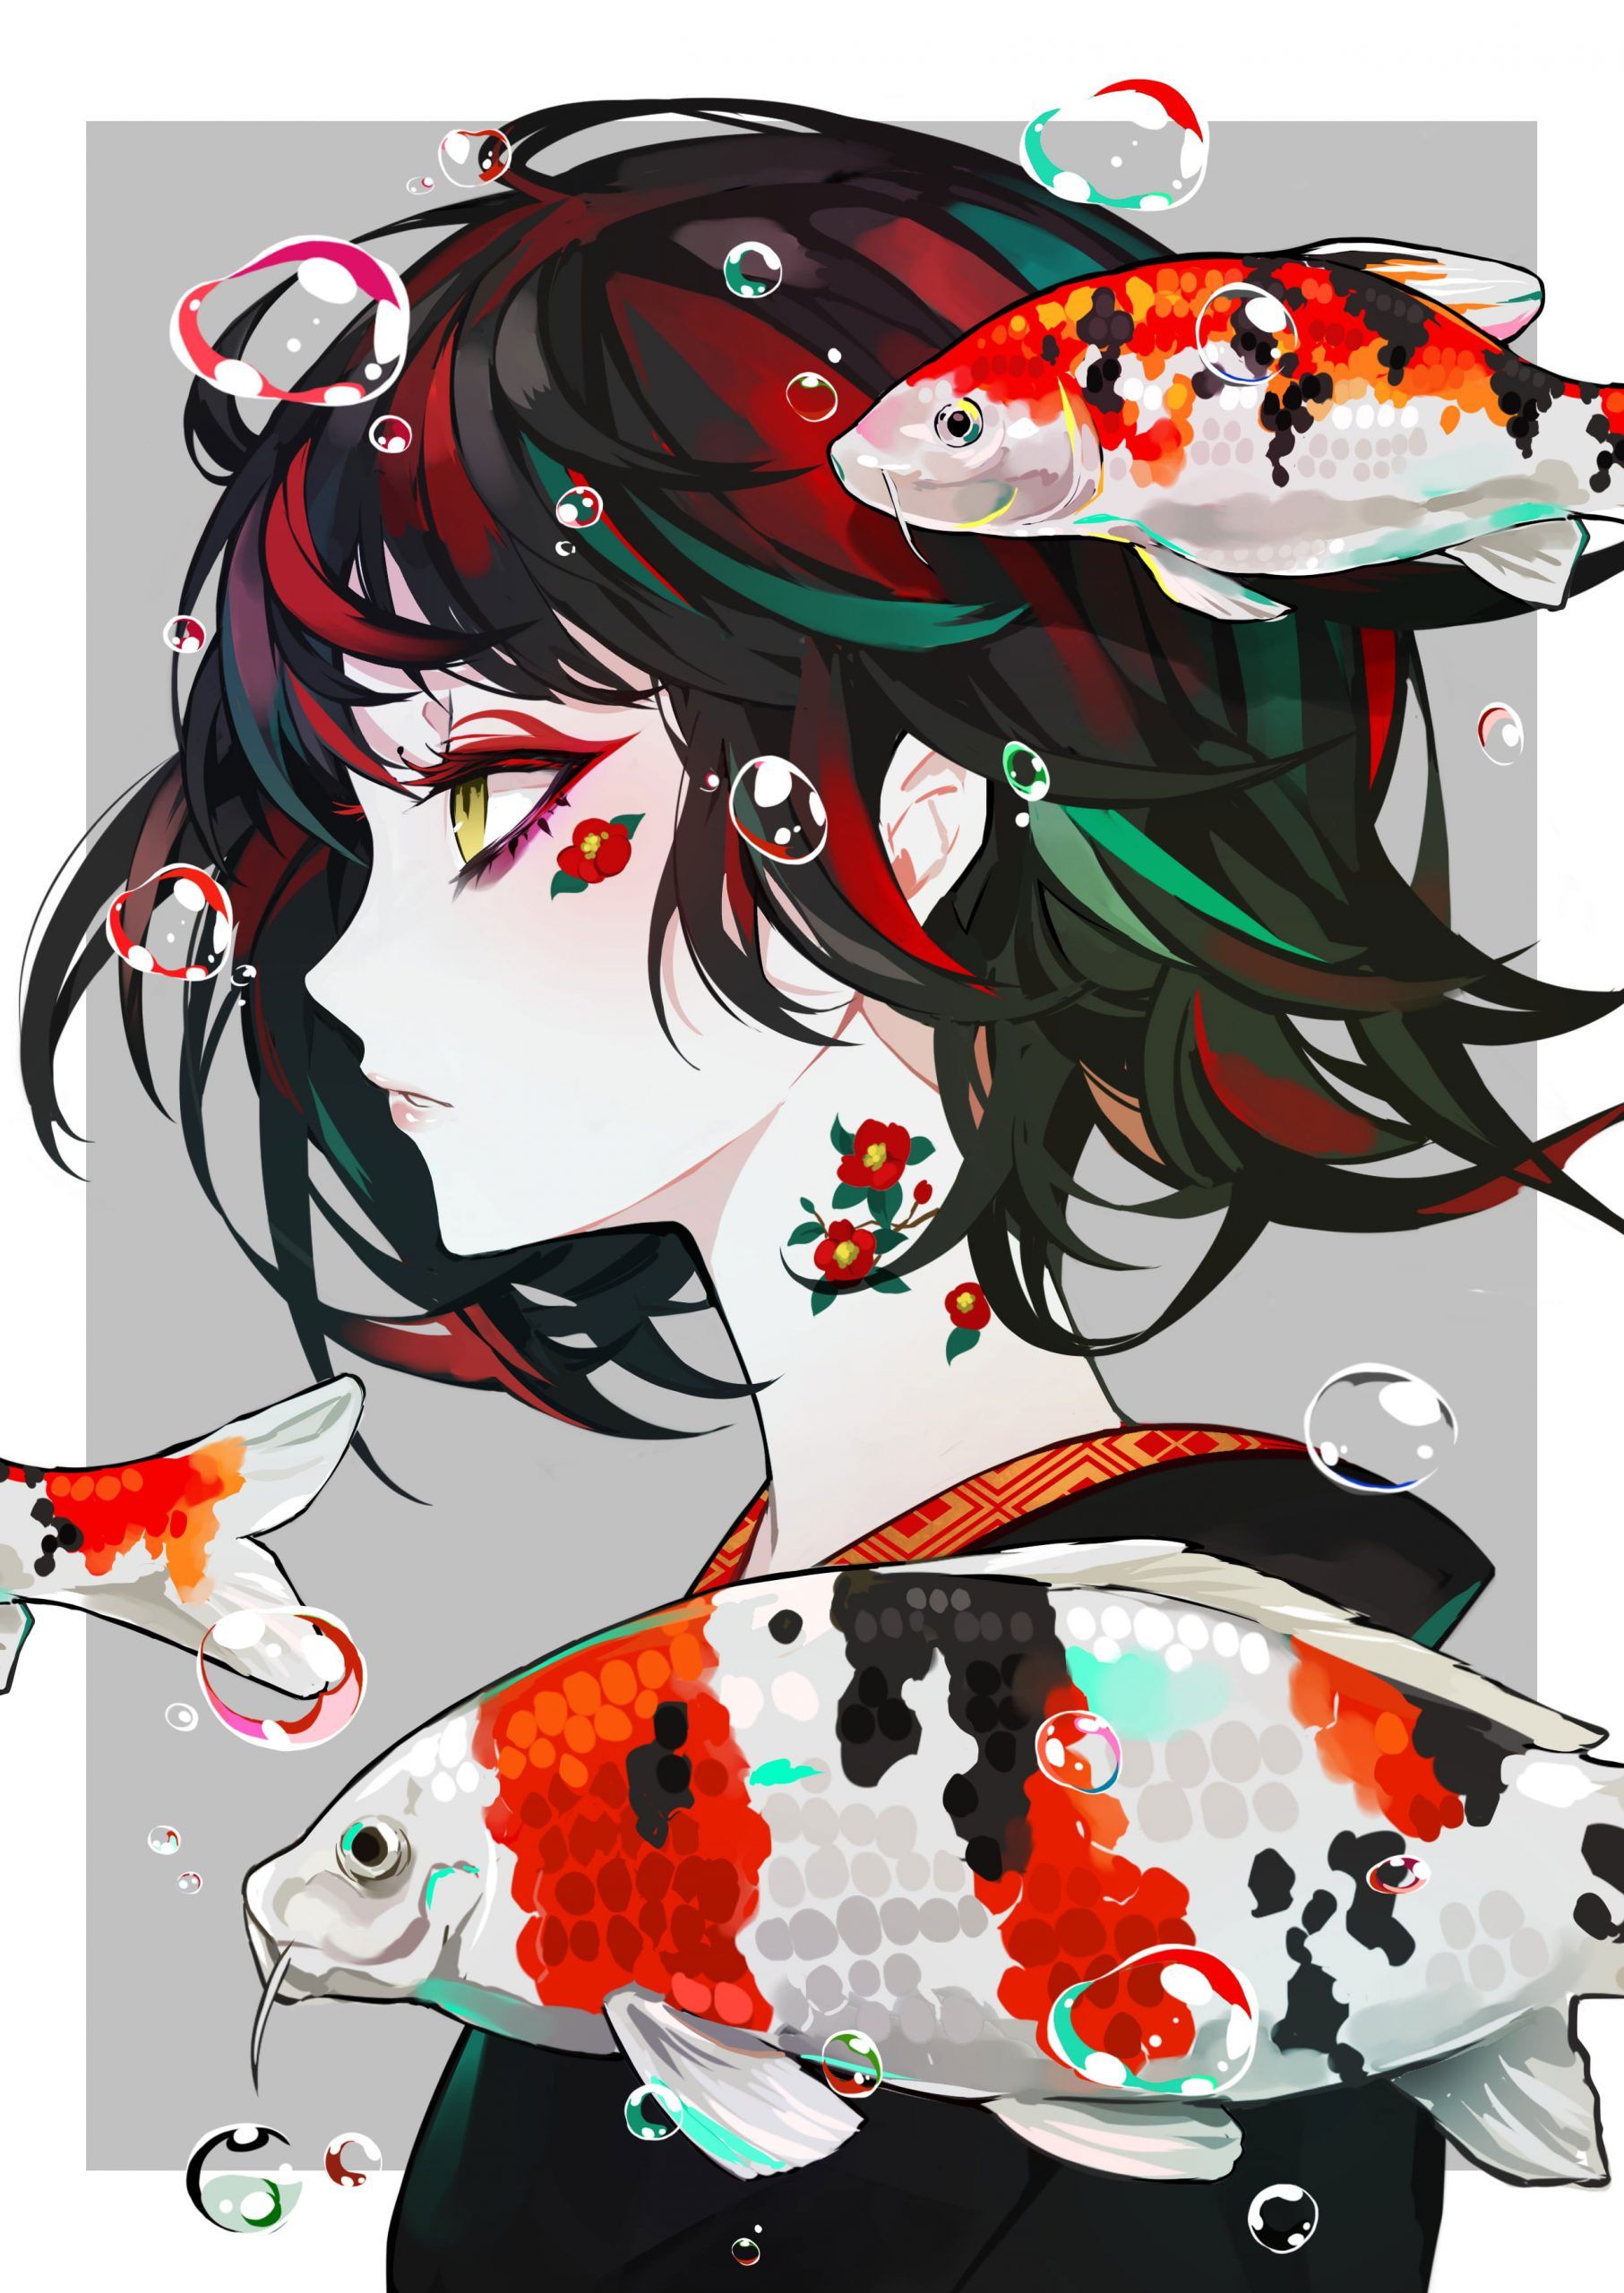 Anime girl with long black hair and a red streak in her hair, surrounded by koi fish - Anime girl